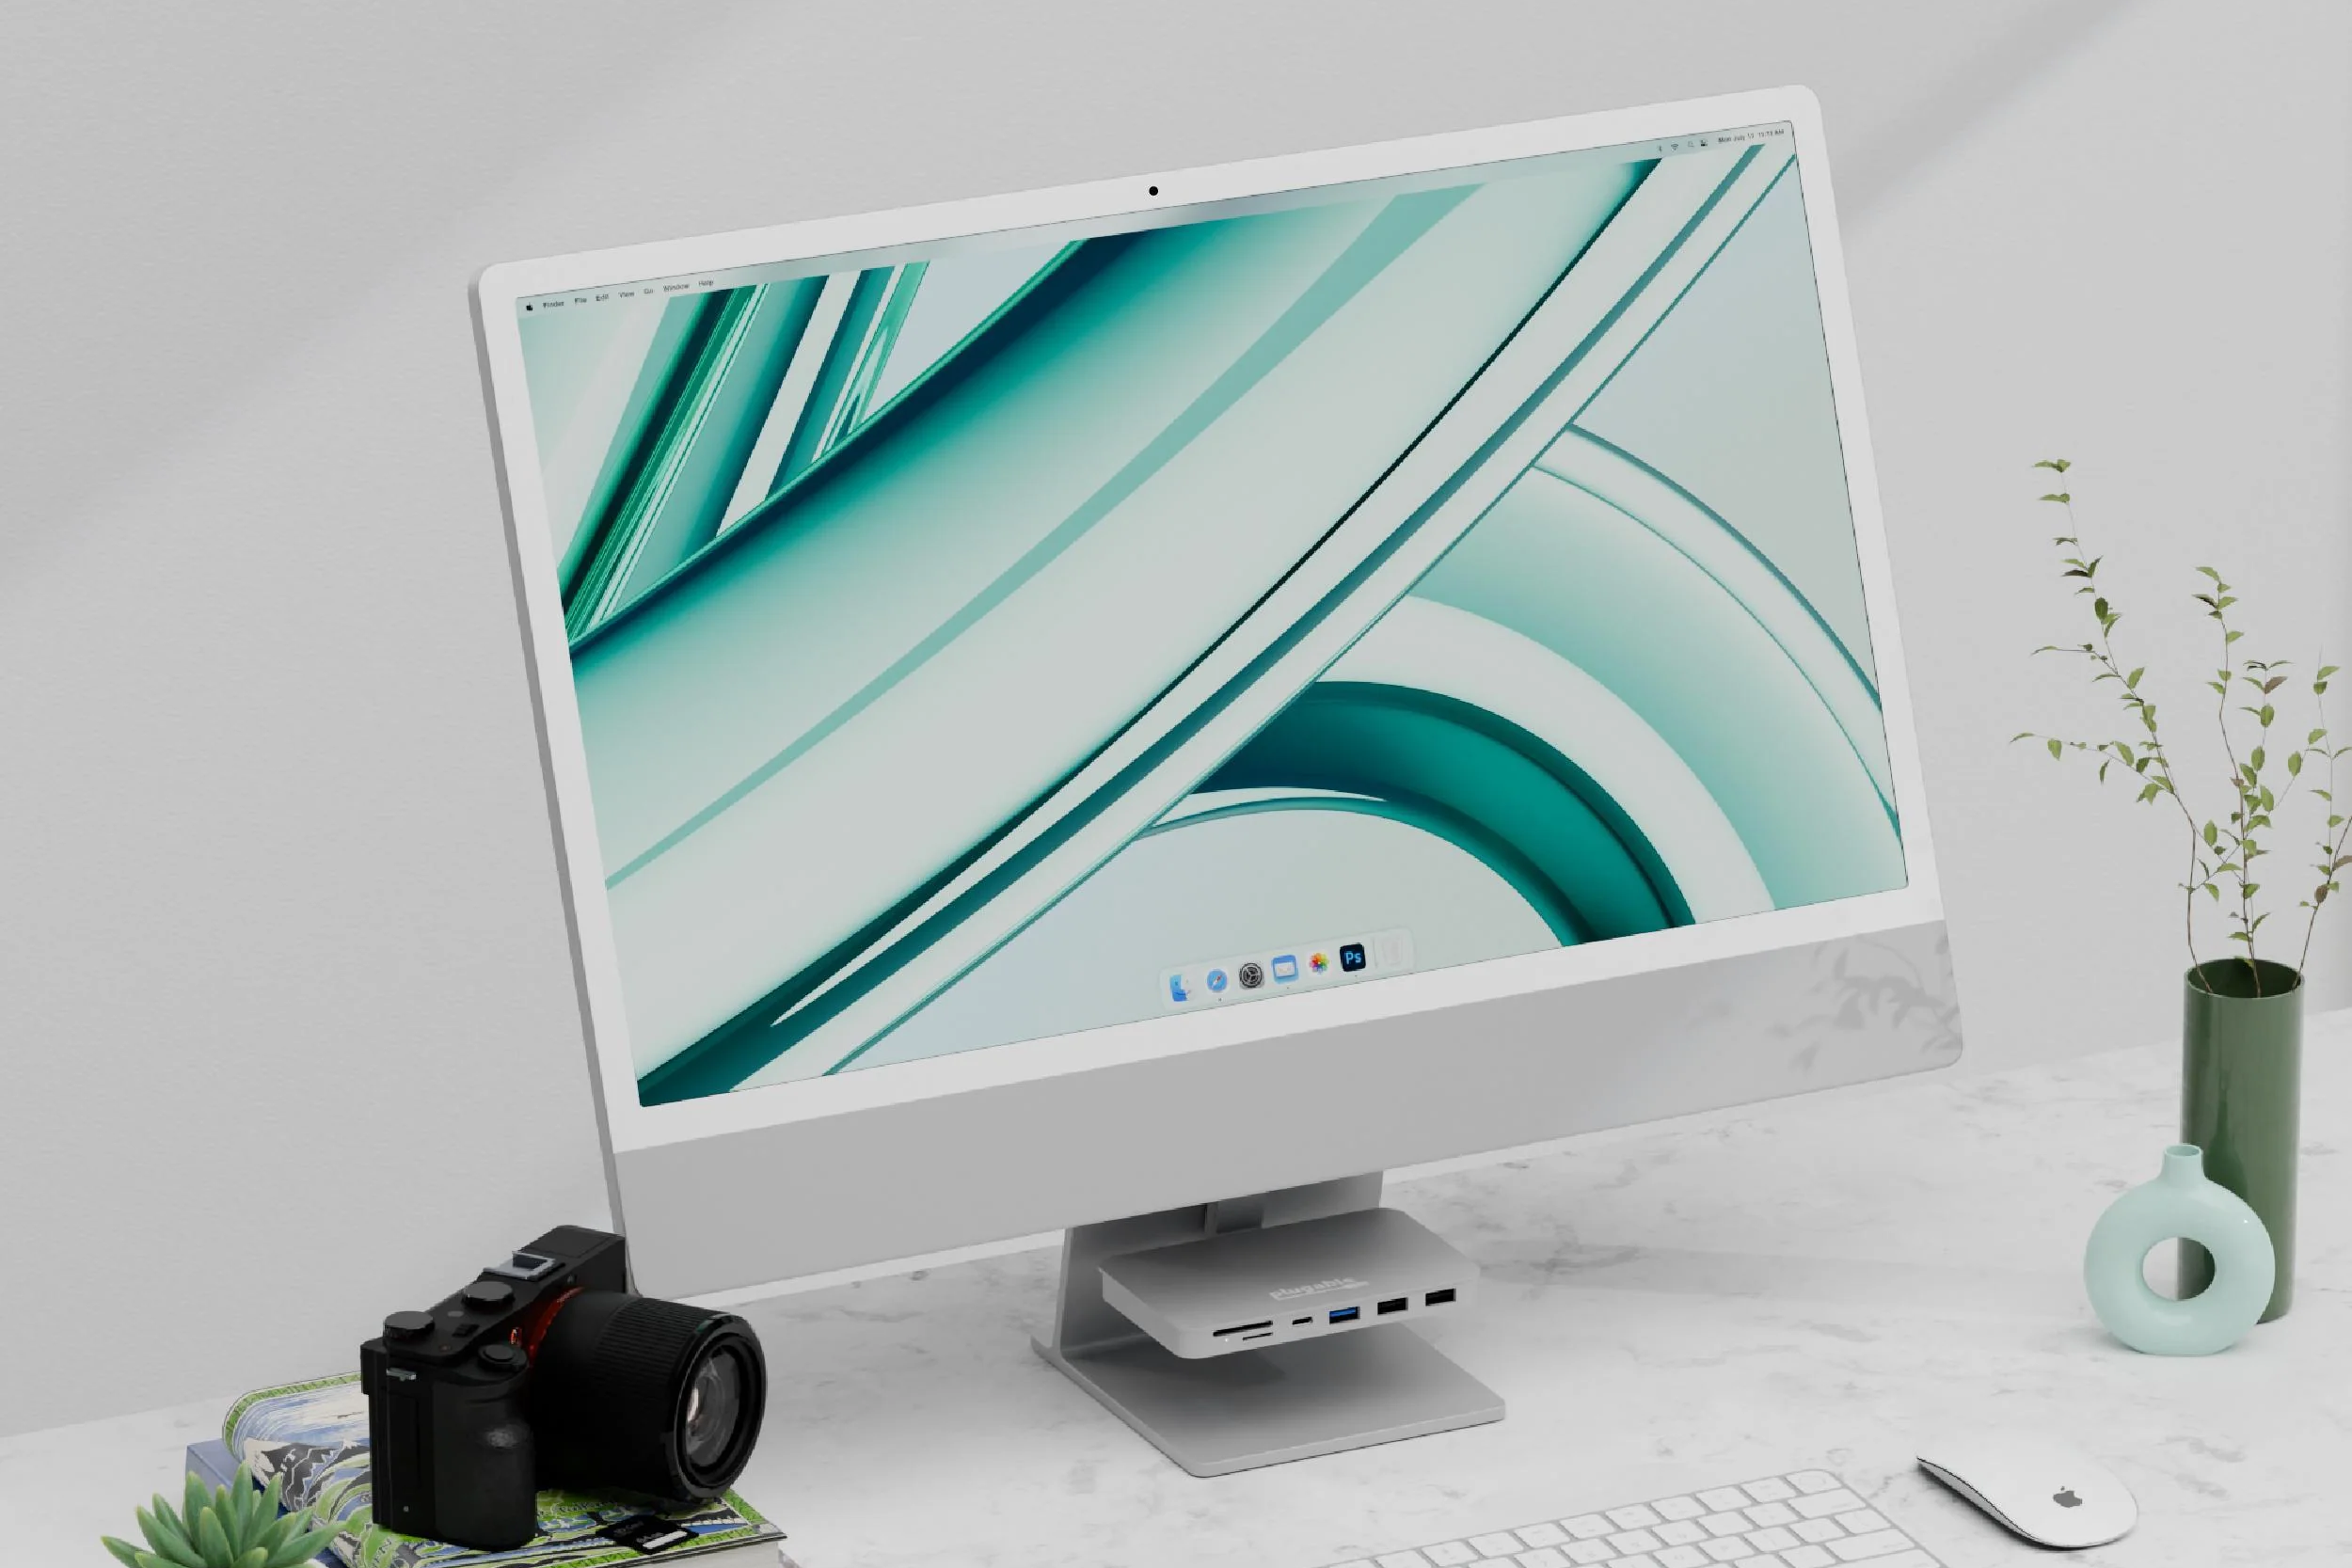 Plugable's new USB hub is tailor-made for the iMac, and it doubles as a shelf